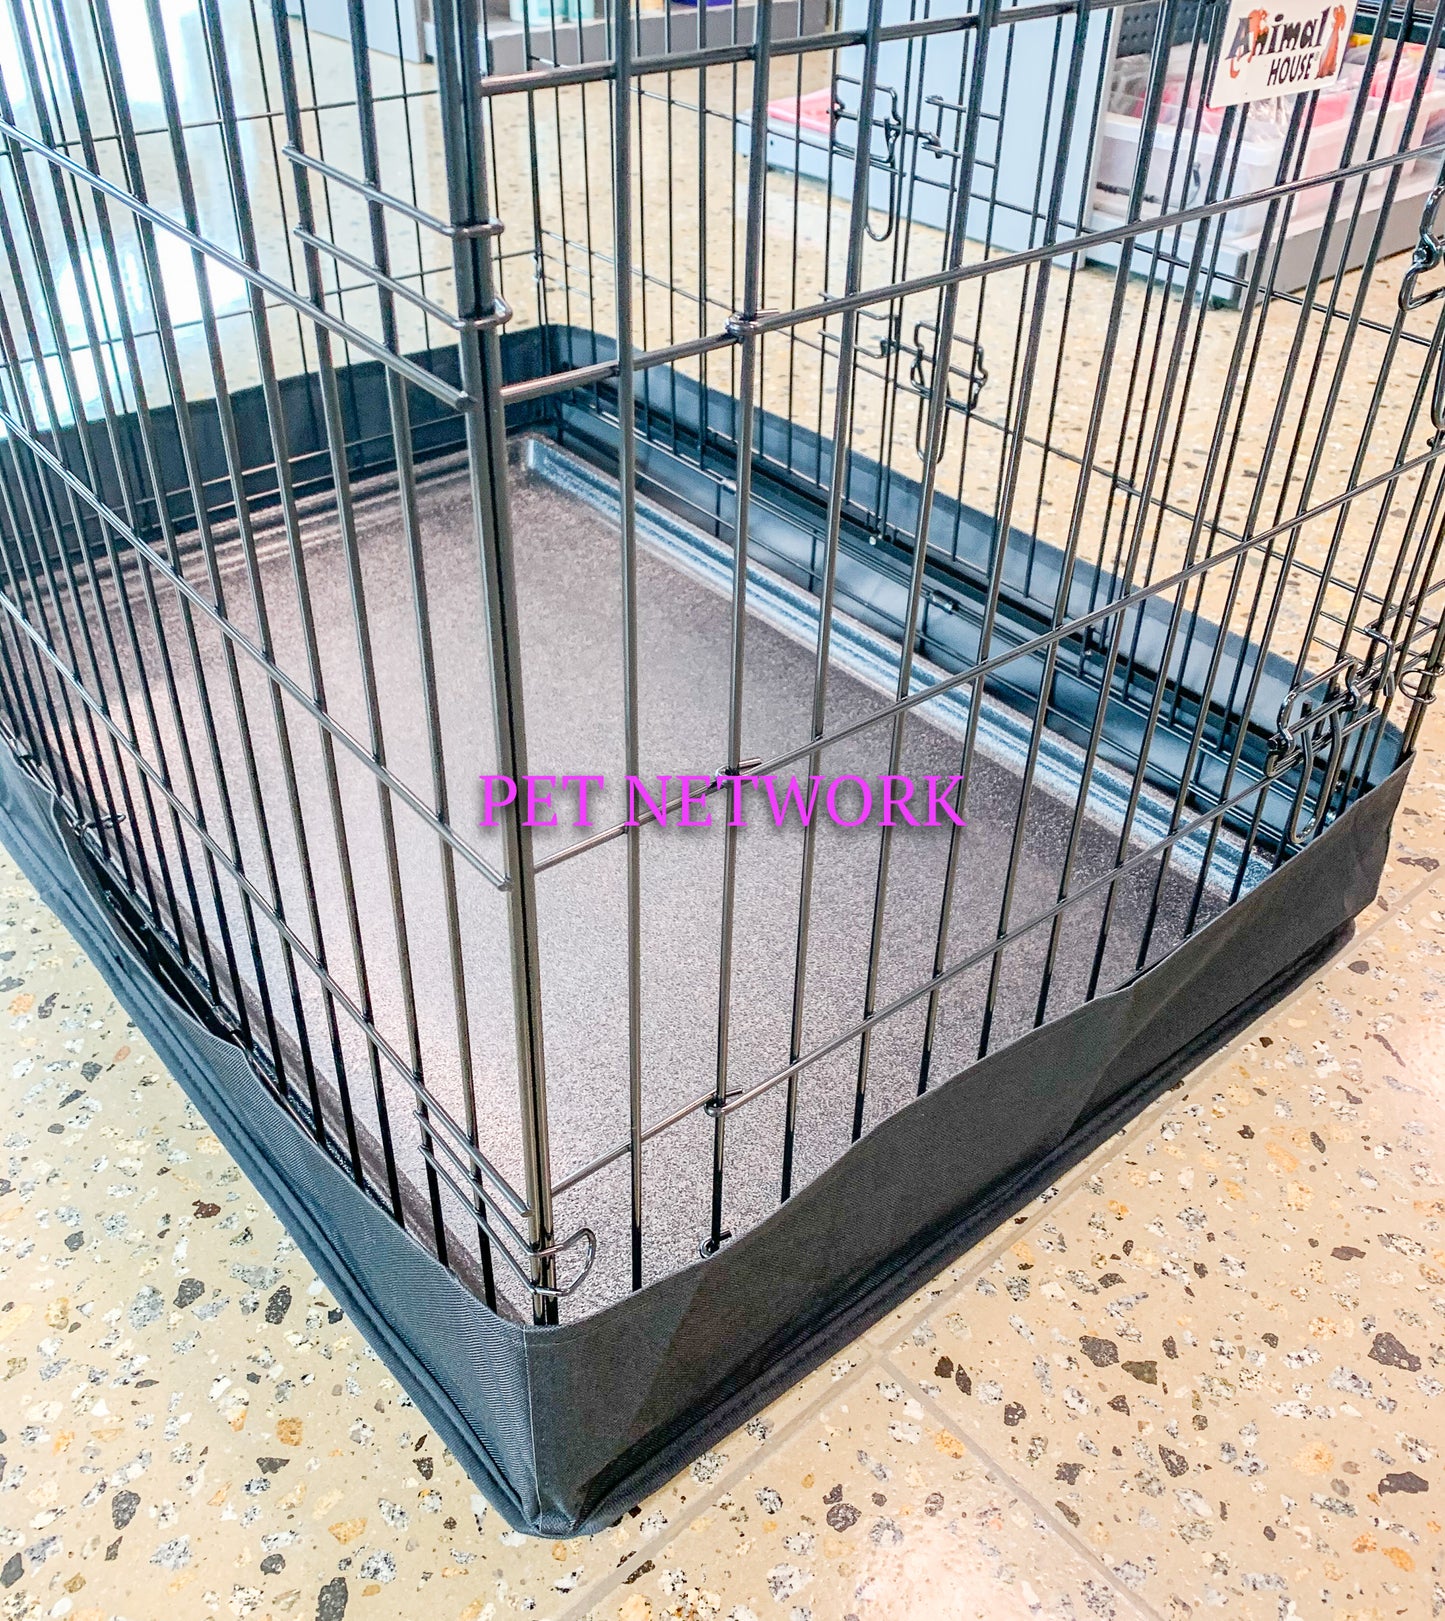 Protective Cover to fit Base of Crate - Animal House 36" Crate